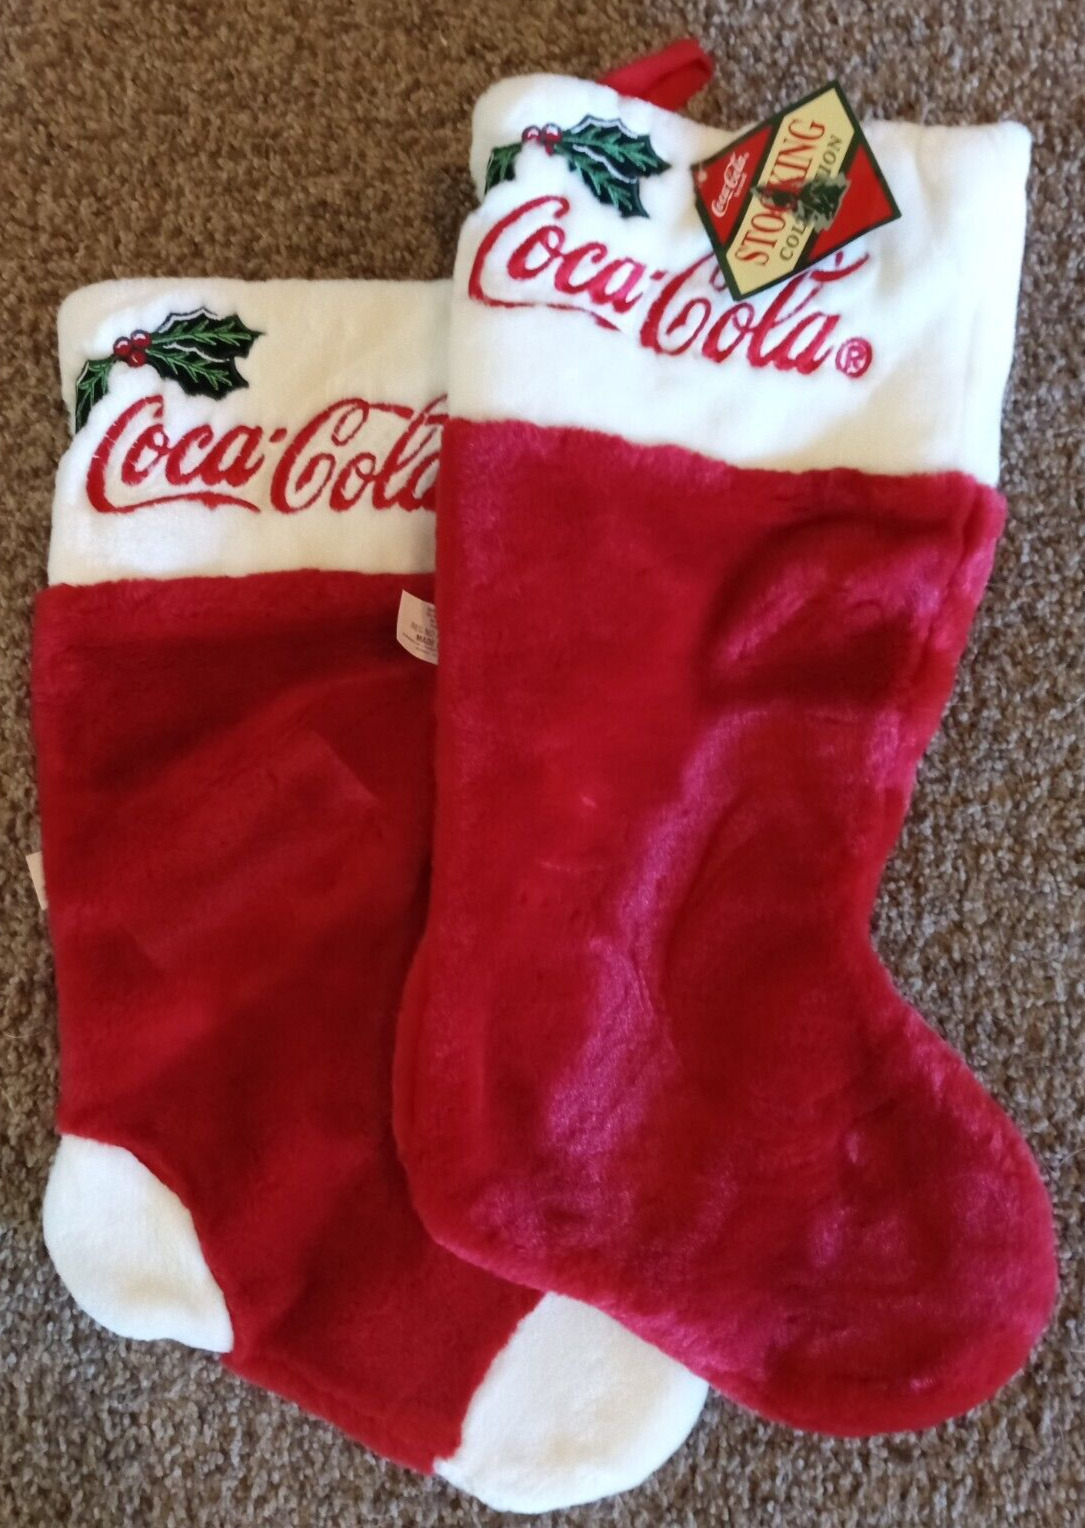 New Coca Cola Christmas Stockings Set of 2 Red White Collectible Coke